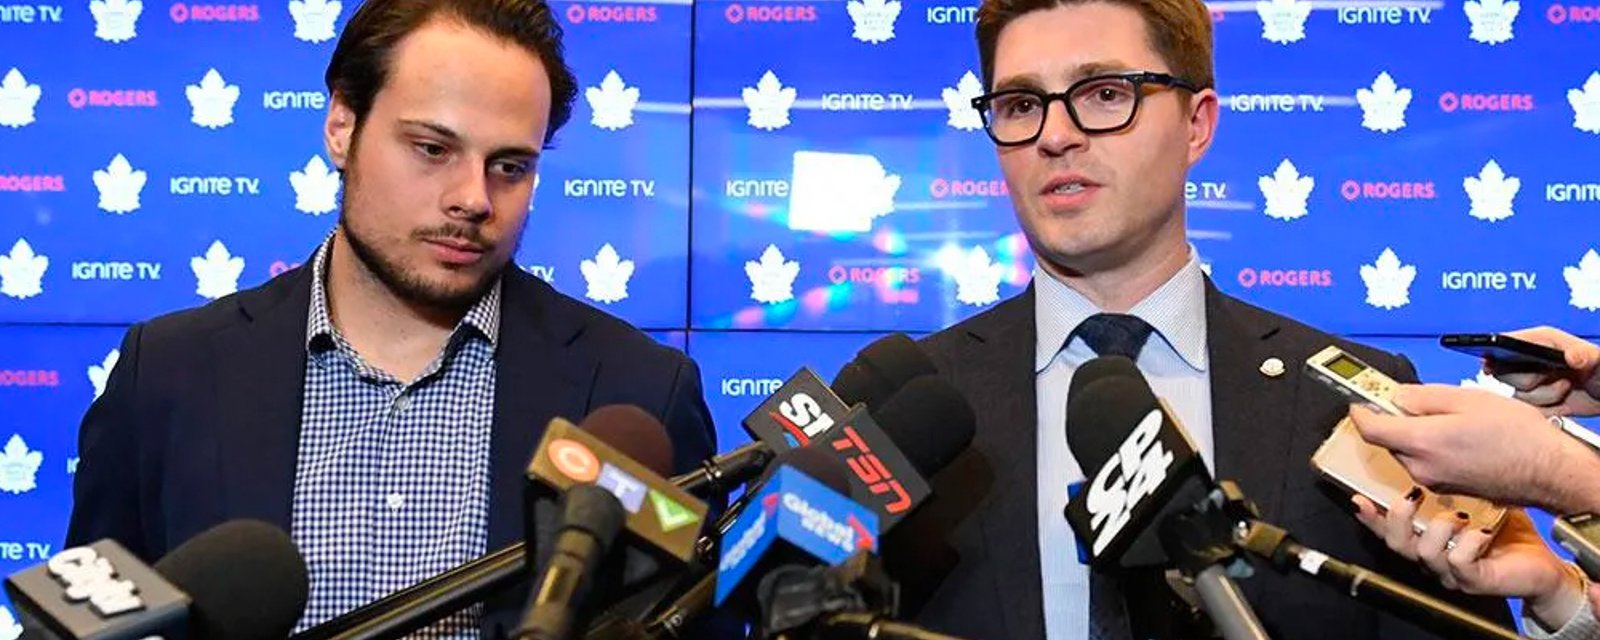 Kyle Dubas, Auston Matthews and their agents under review by NHL and NHLPA